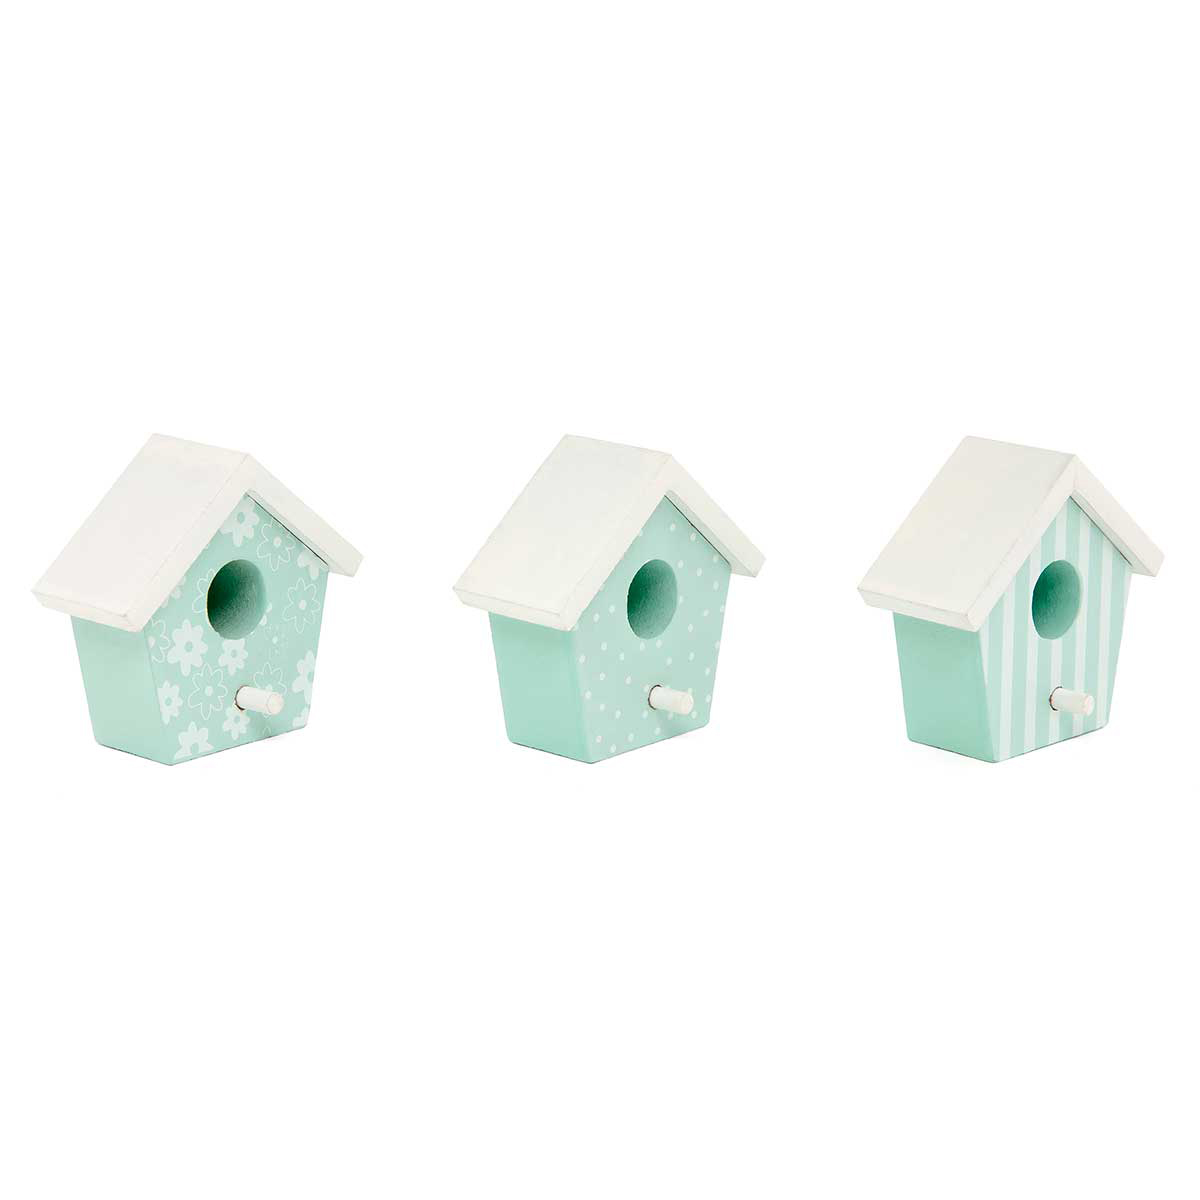 b50 SIT-A-BOUT BIRDHOUSE 3ASSORTED 2.25IN X 1.25IN X 2.25IN WOOD